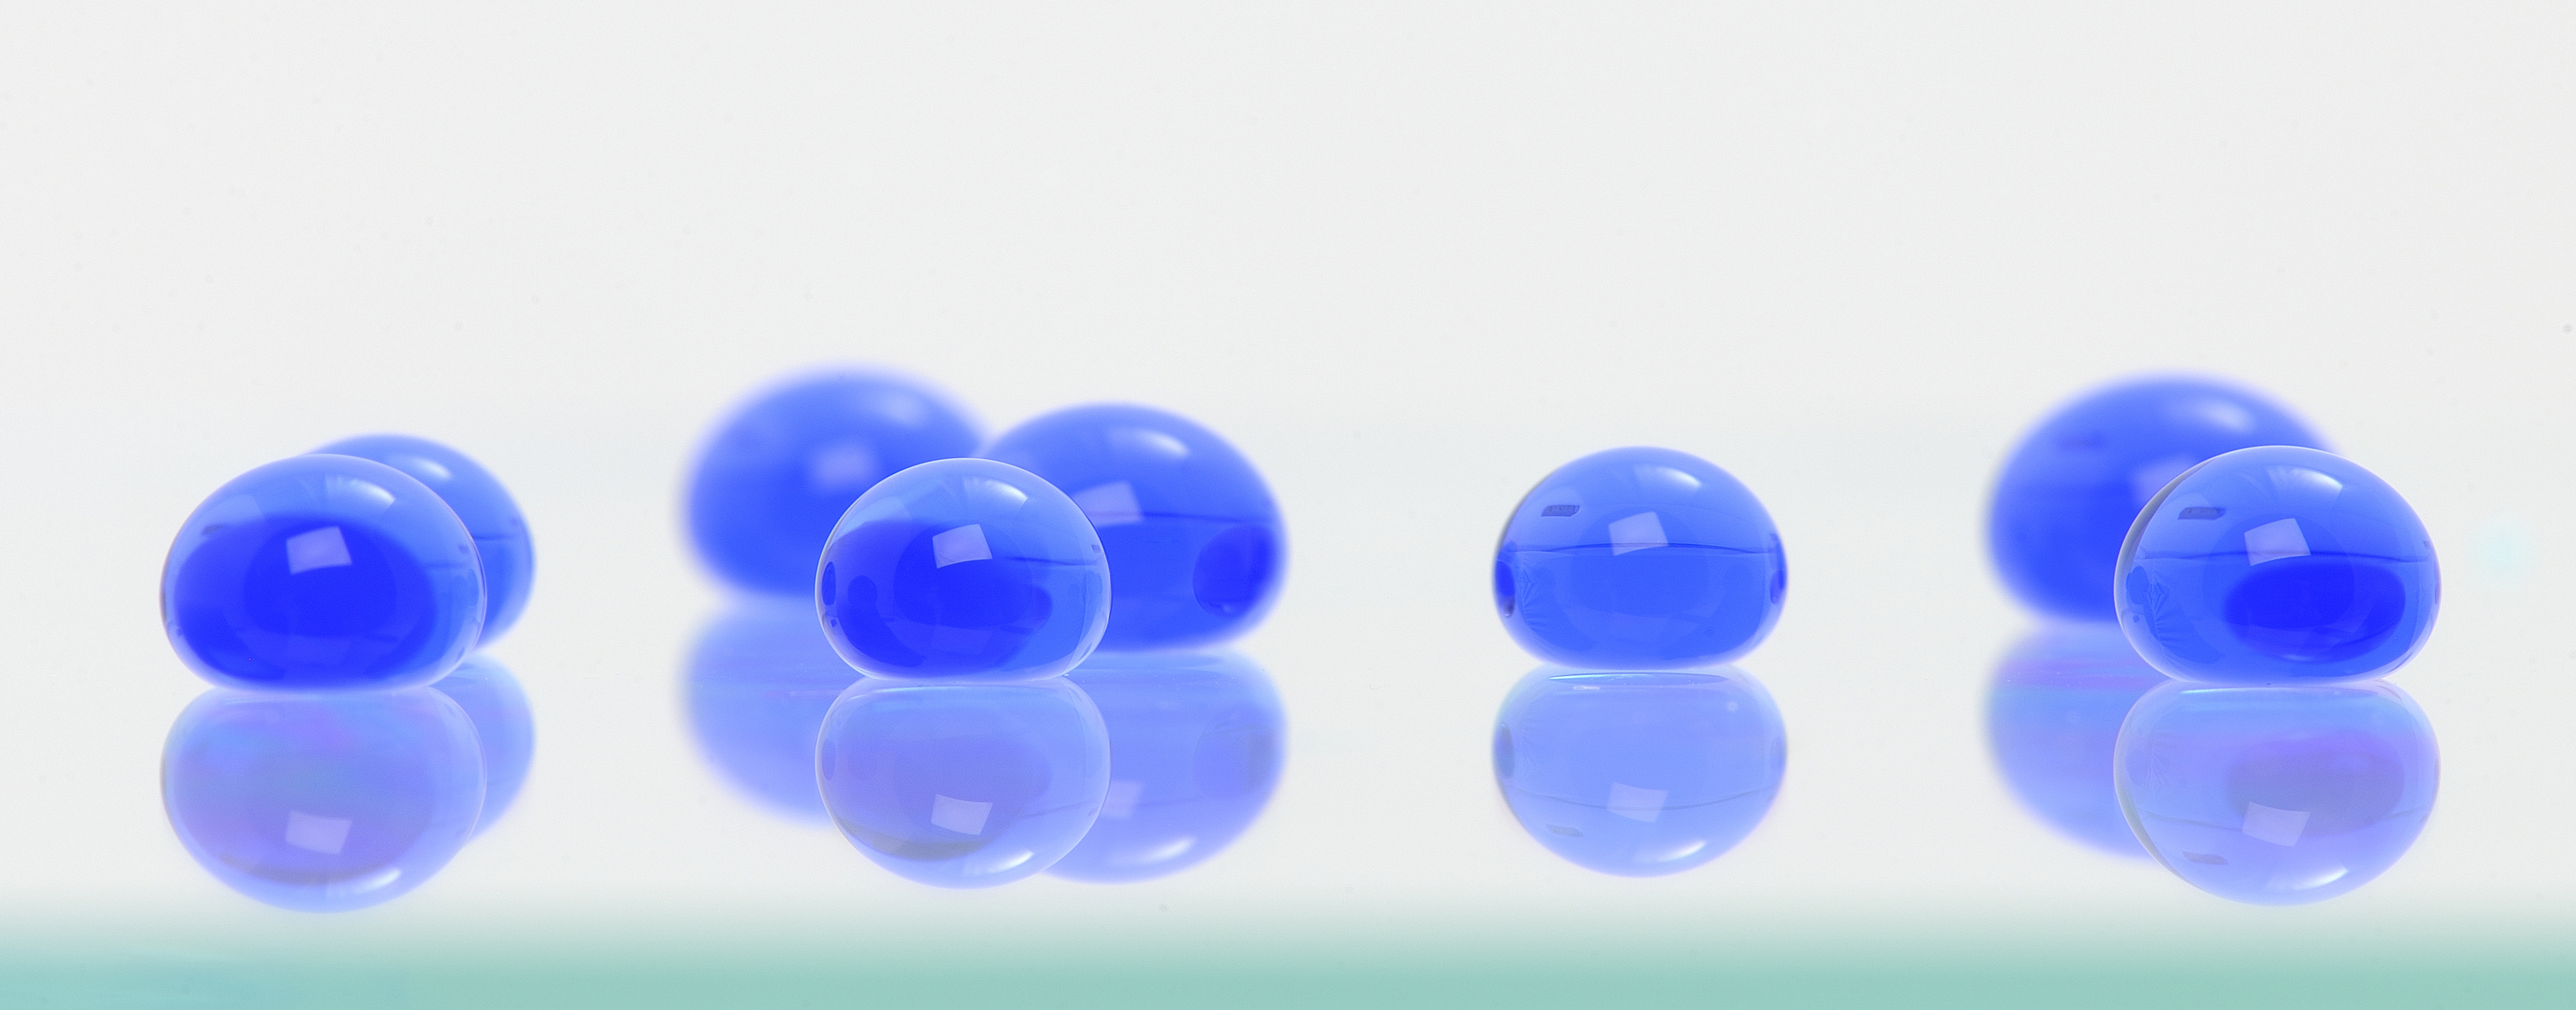 Coloured water droplets on a surface treated with a superhydrophobic coating developed at TWI